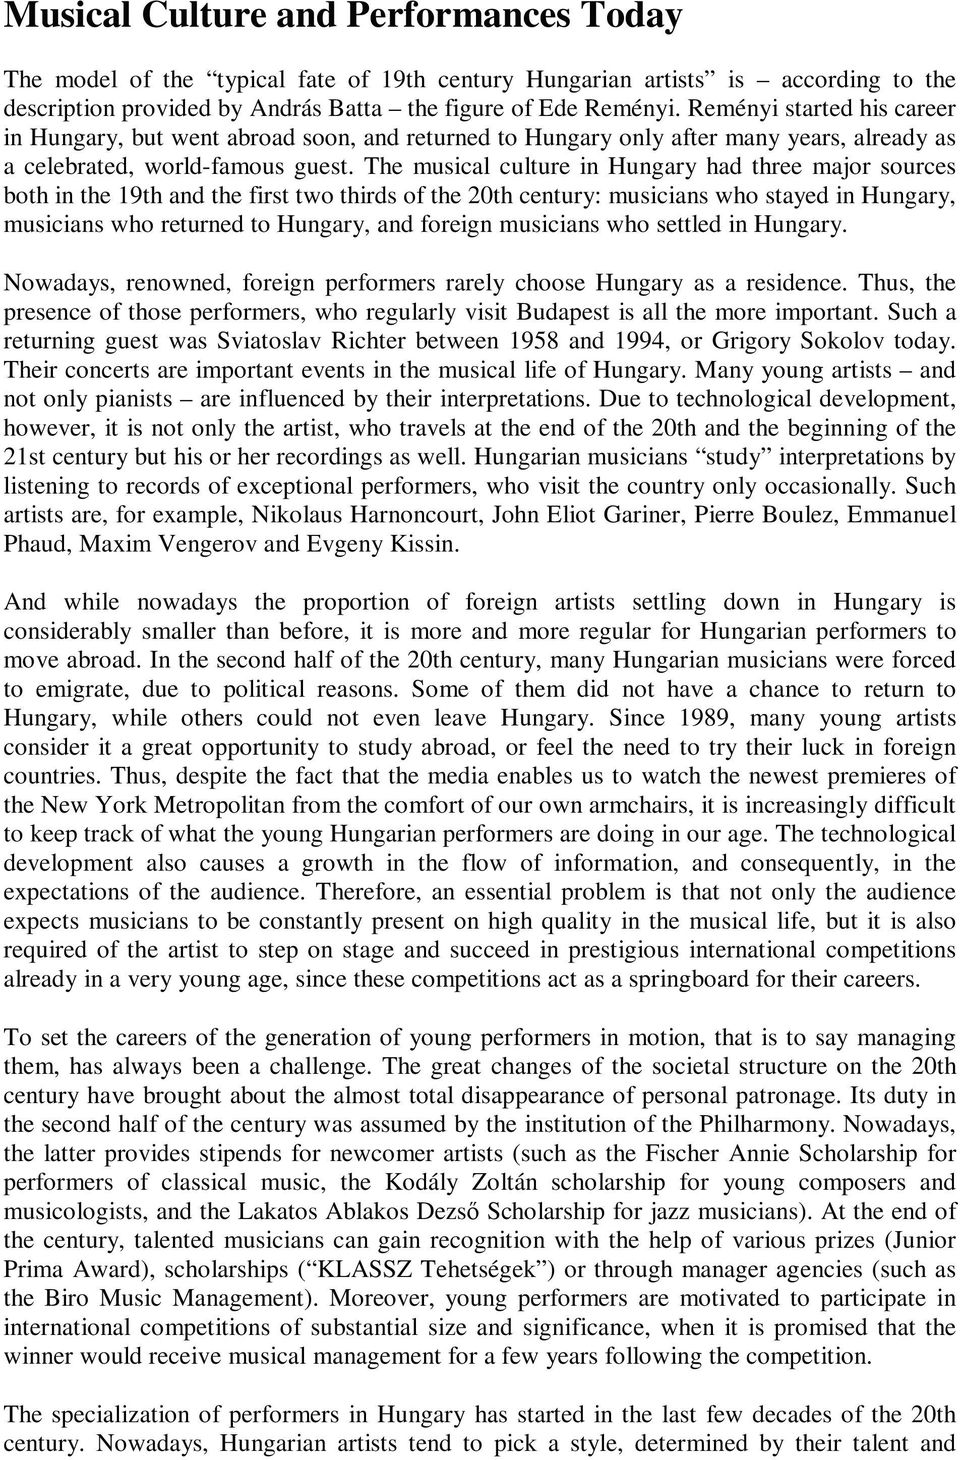 The musical culture in Hungary had three major sources both in the 19th and the first two thirds of the 20th century: musicians who stayed in Hungary, musicians who returned to Hungary, and foreign